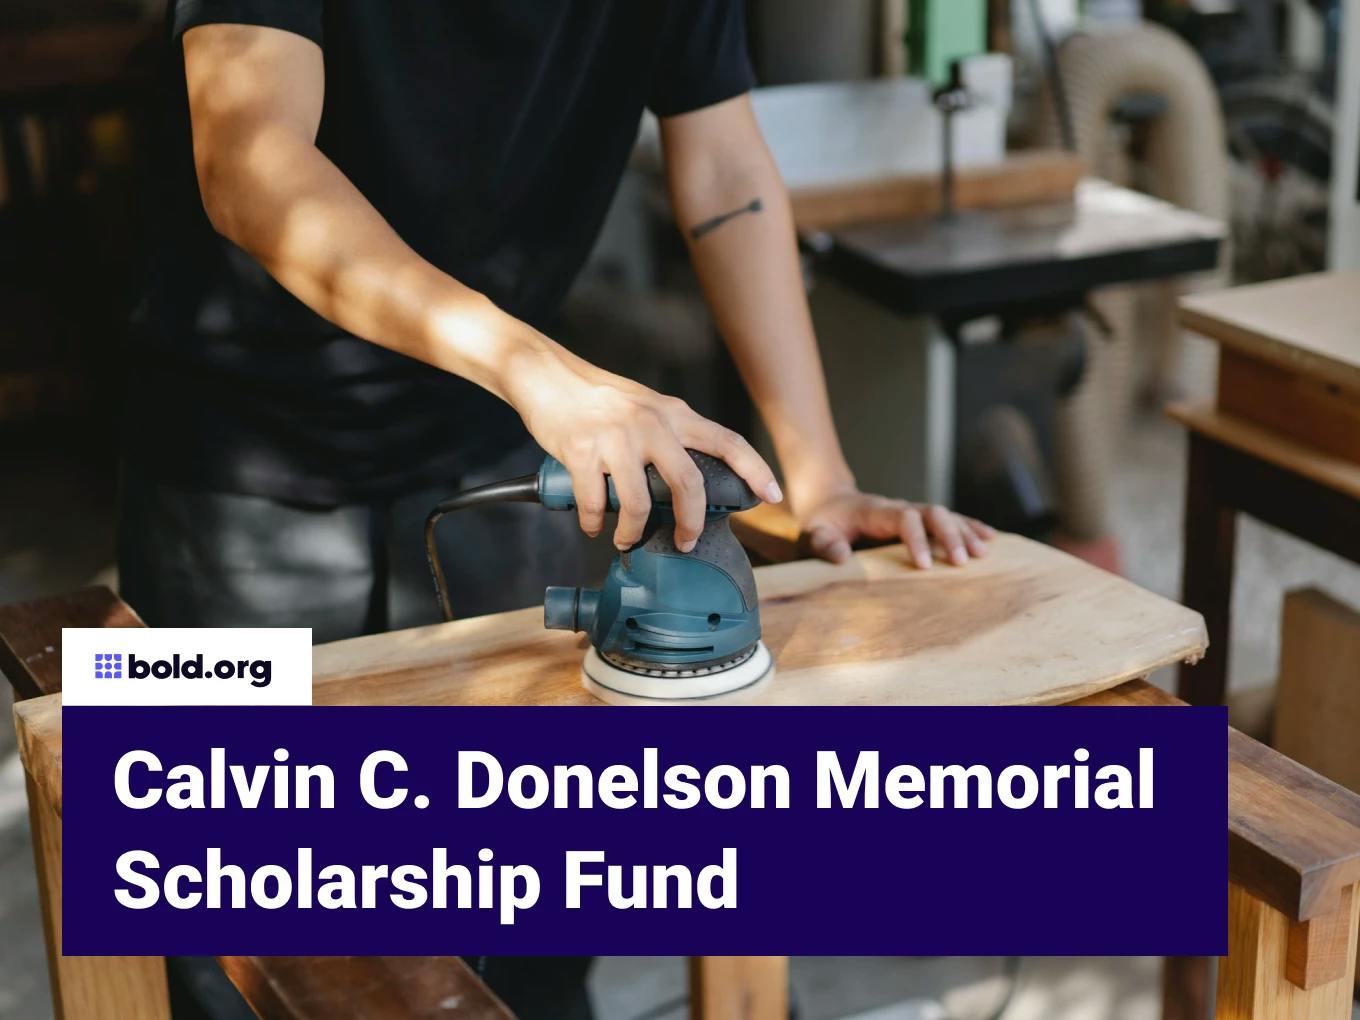 The Calvin C. Donelson Memorial Scholarship Fund